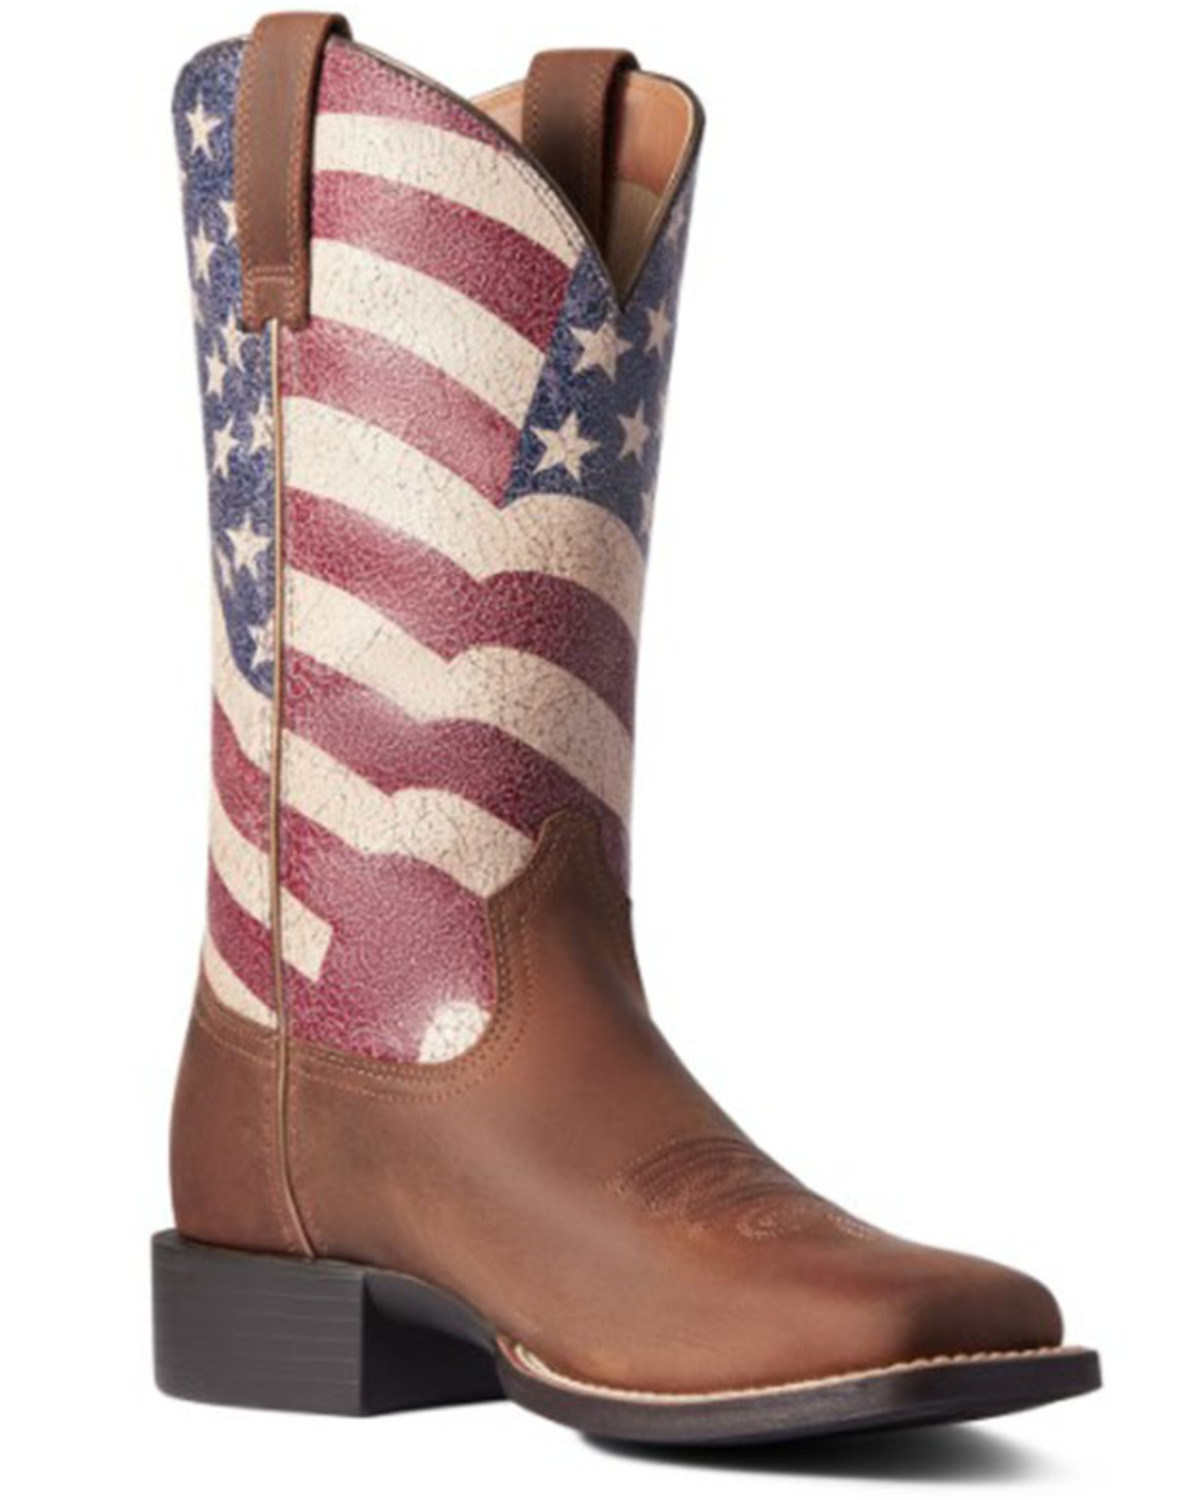 Ariat Women's Round Up Patriot Western Performance Boots - Square Toe